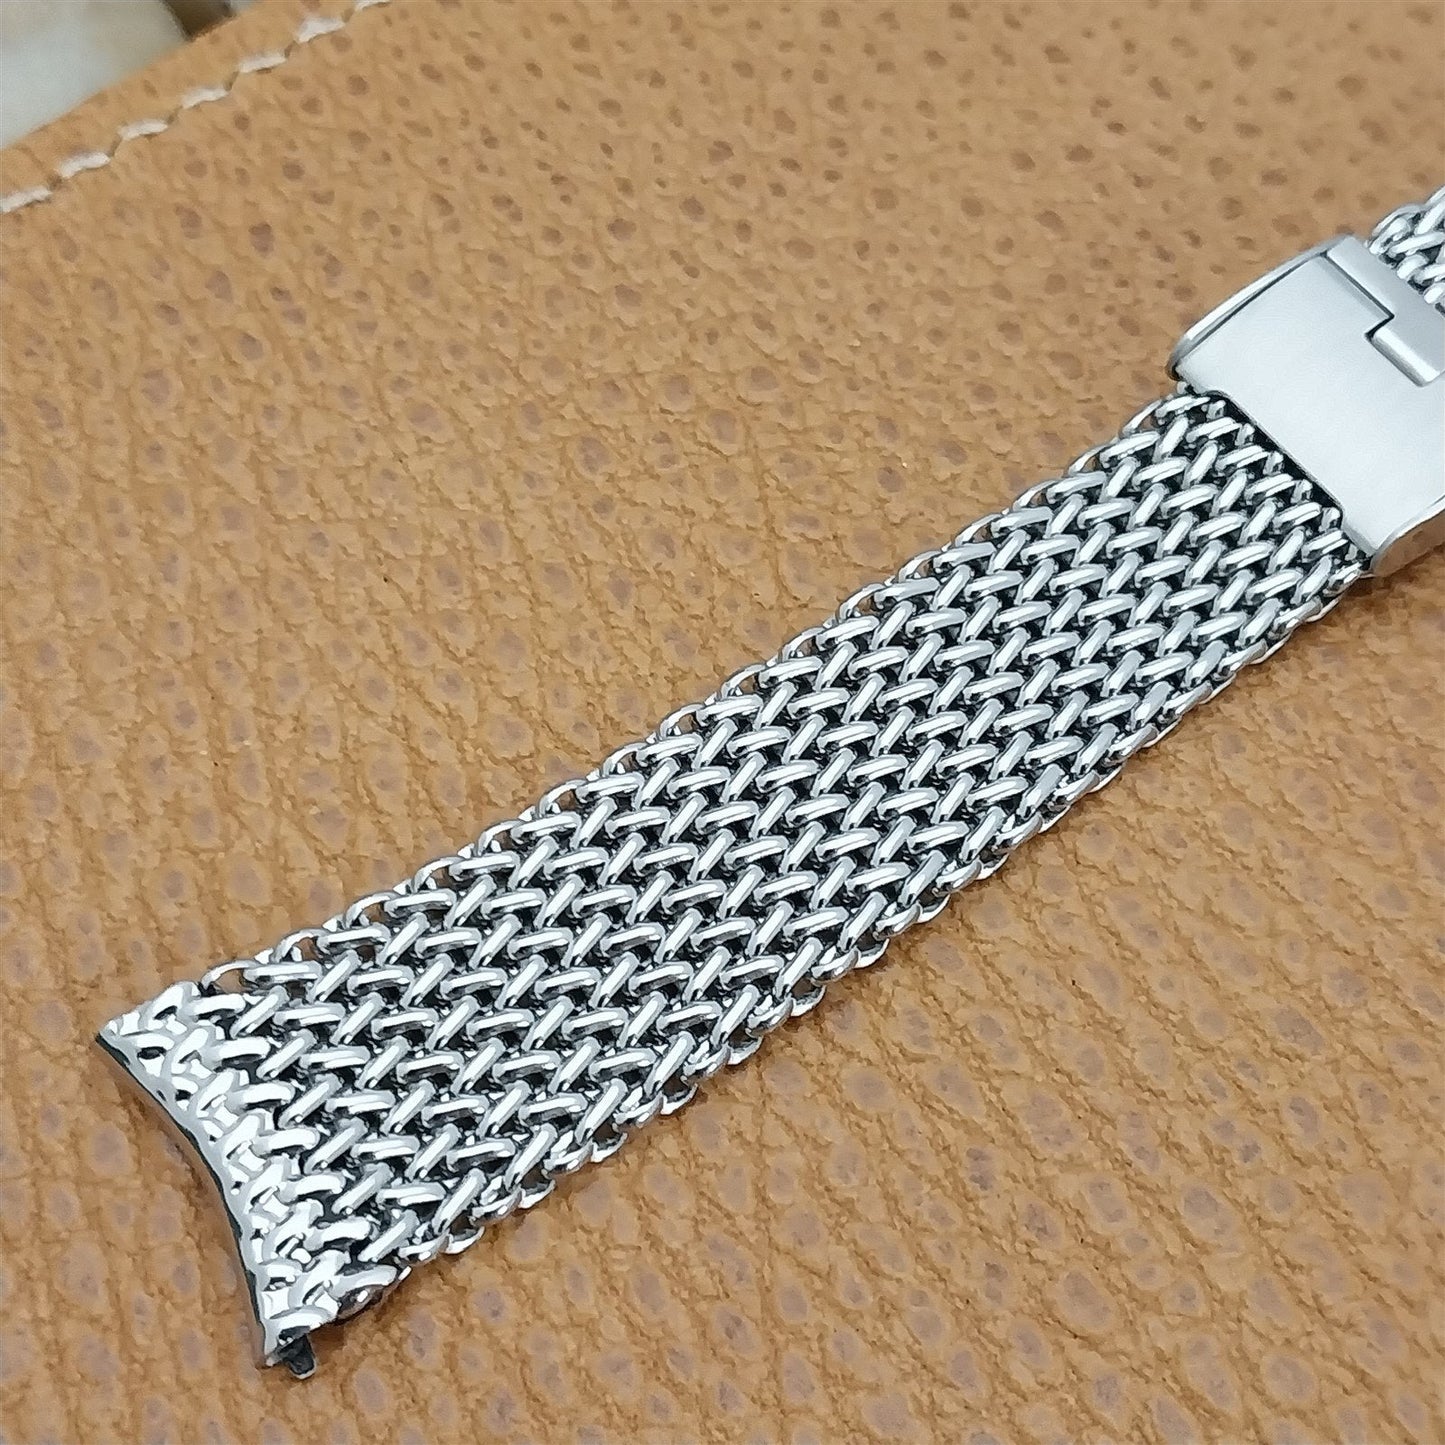 17.2mm Stainless Steel Mesh JB Champion Classic Unused 1960s Vintage Watch Band